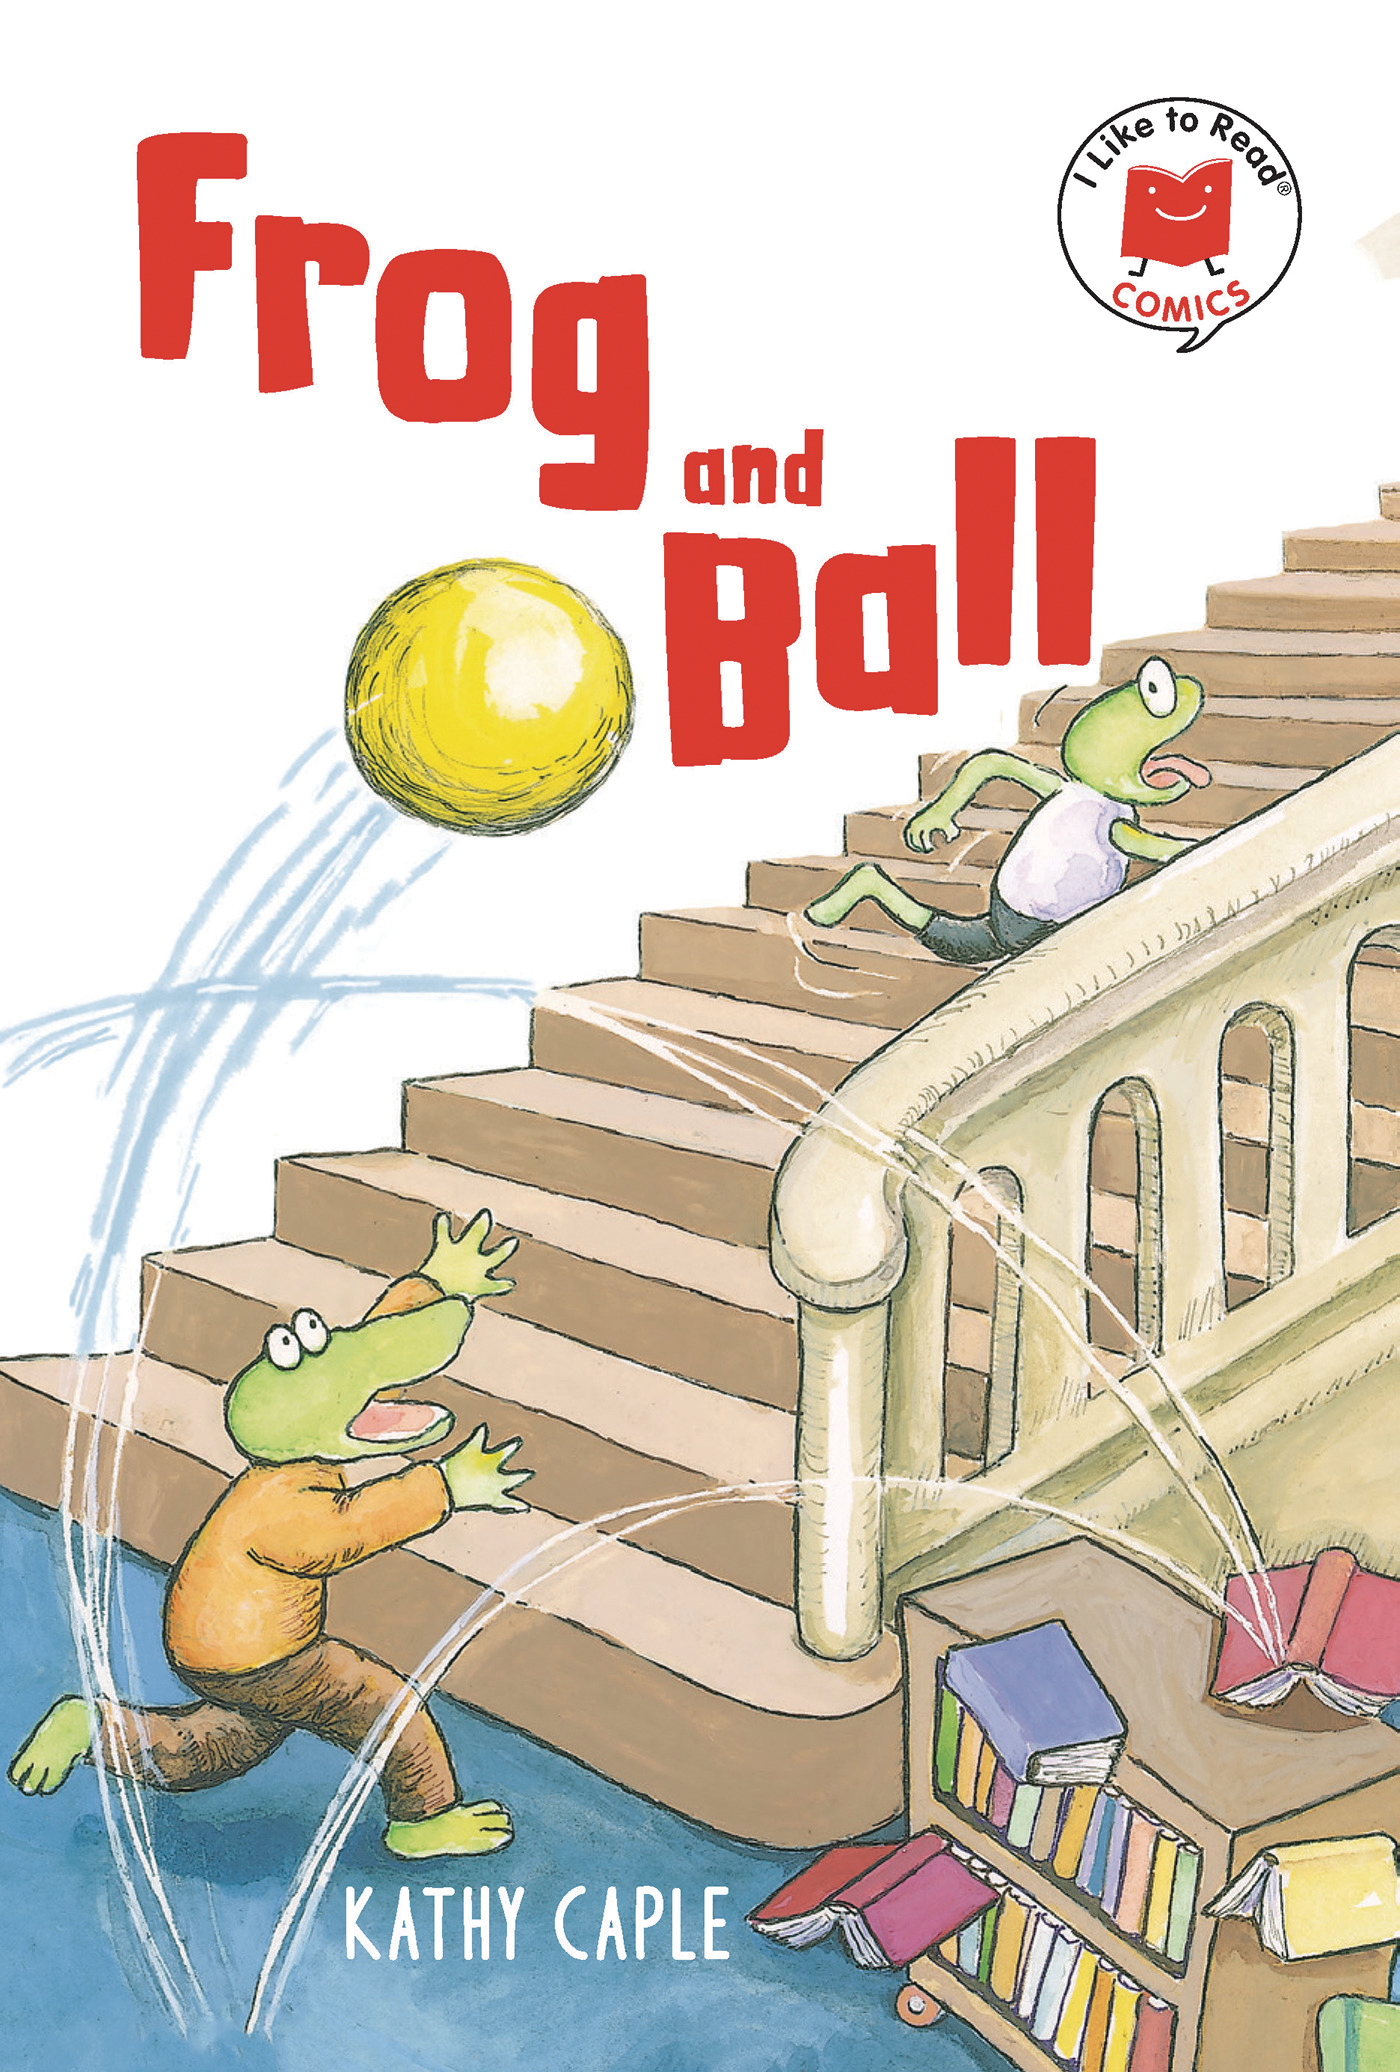 I Like To Read Comics Volume 4 Frog And Ball Soft Cover Graphic Novel